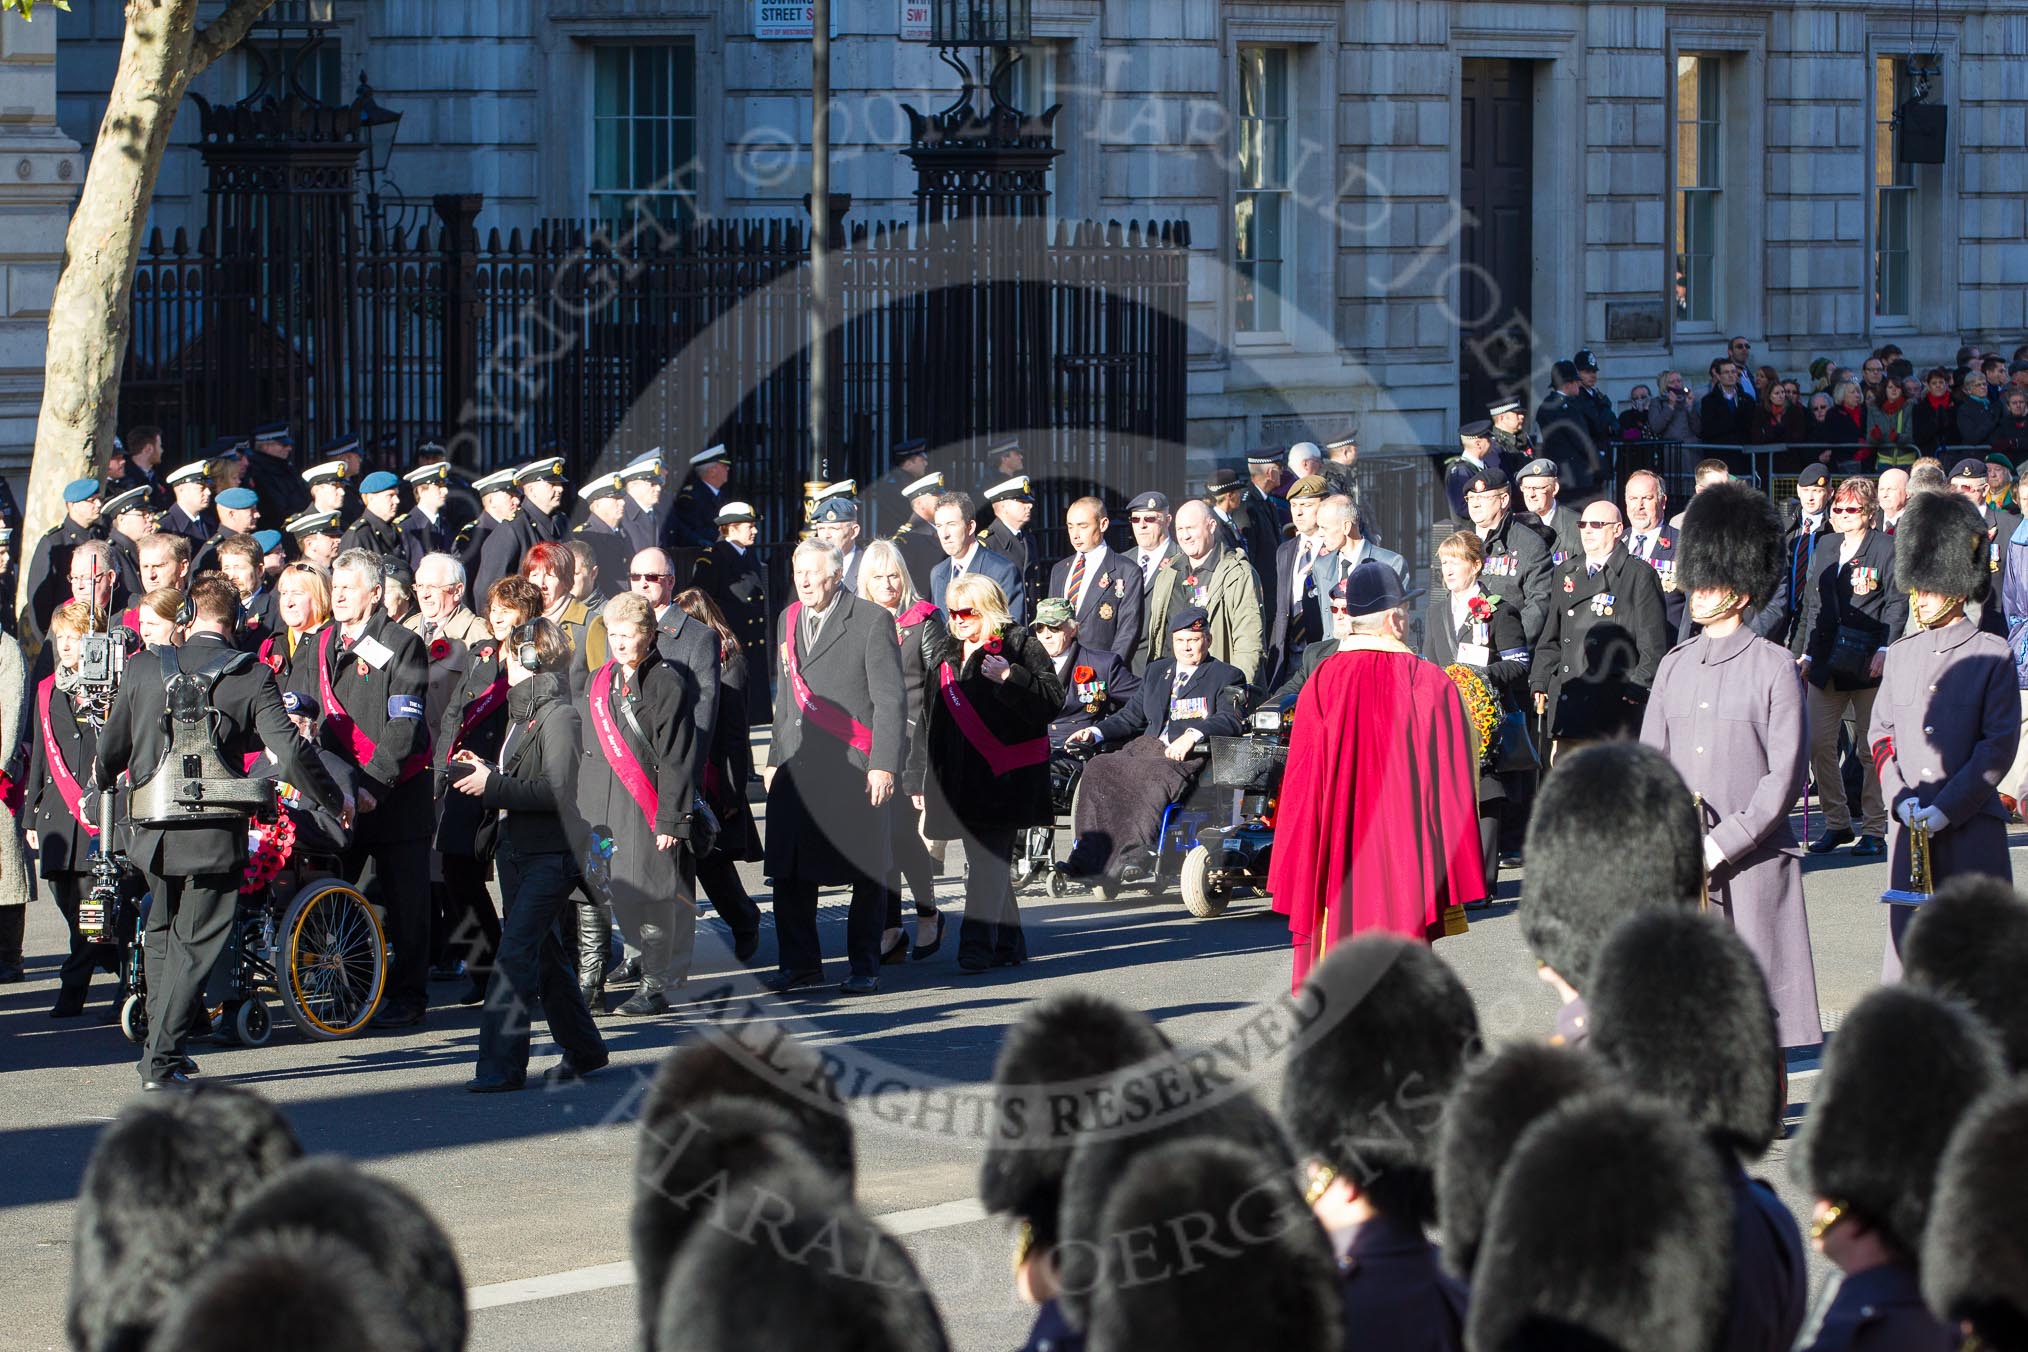 Remembrance Sunday 2012 Cenotaph March Past: Group F14 - National Pigeon War Service and F15 - National Gulf Veterans & Families Association..
Whitehall, Cenotaph,
London SW1,

United Kingdom,
on 11 November 2012 at 11:47, image #492